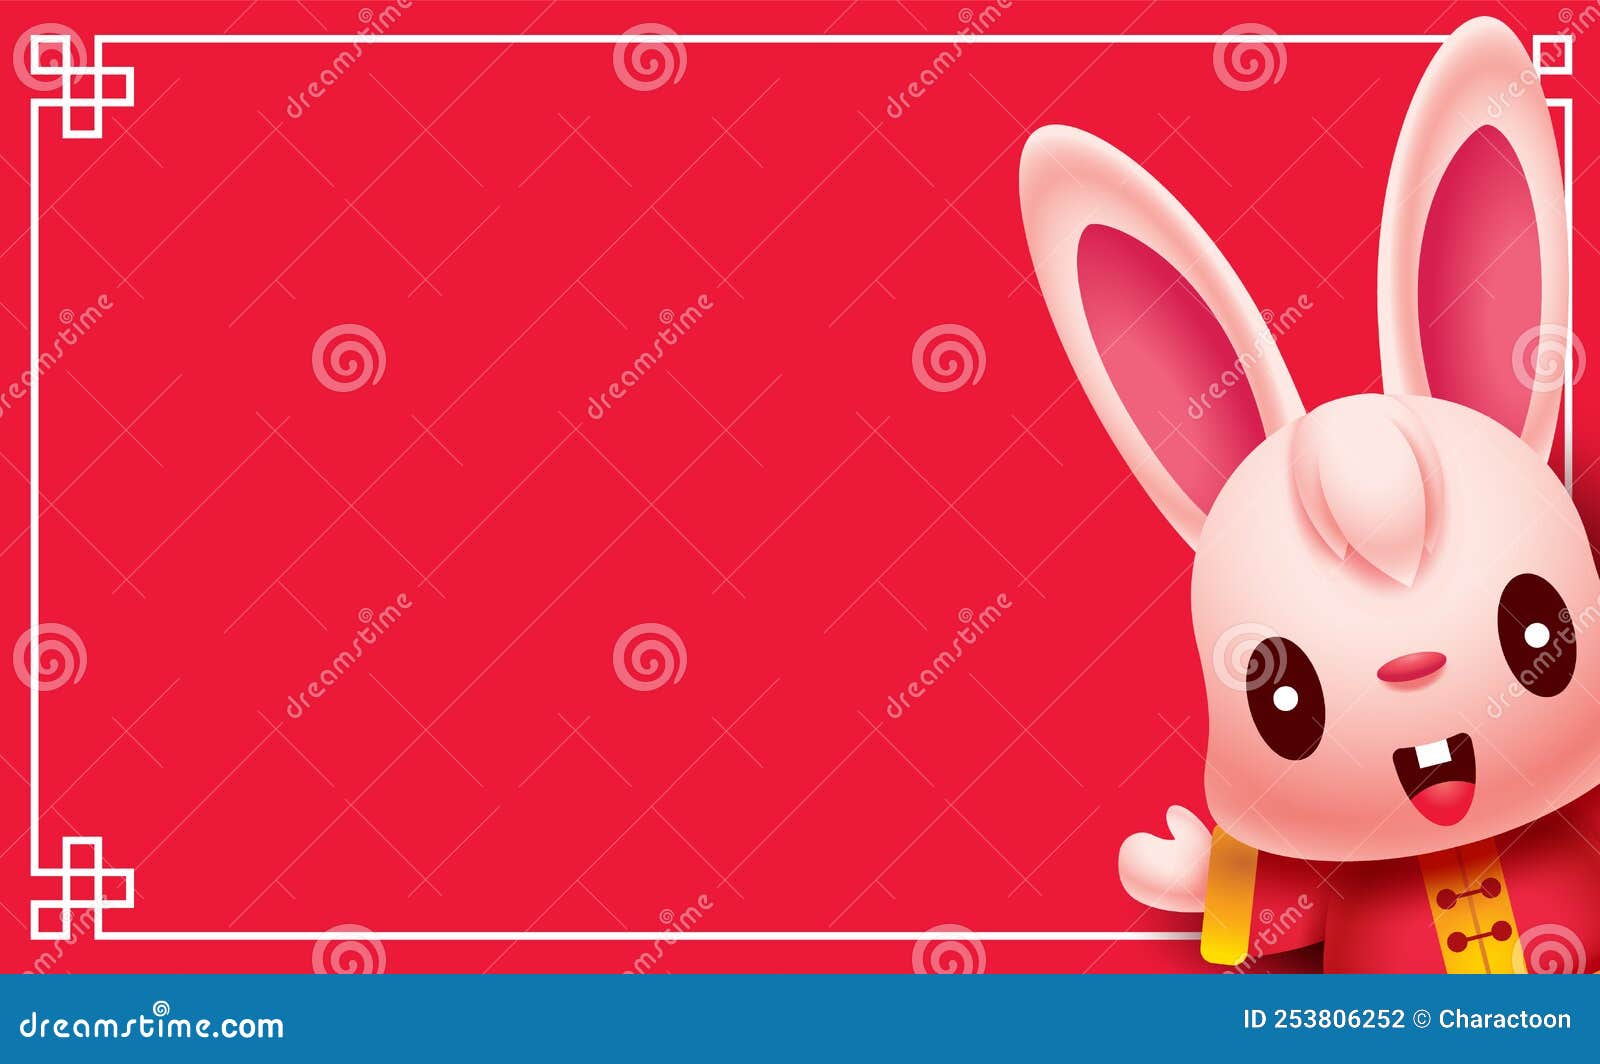 Cute Rabbit Holding Red Envelope Chinese Stock Vector (Royalty